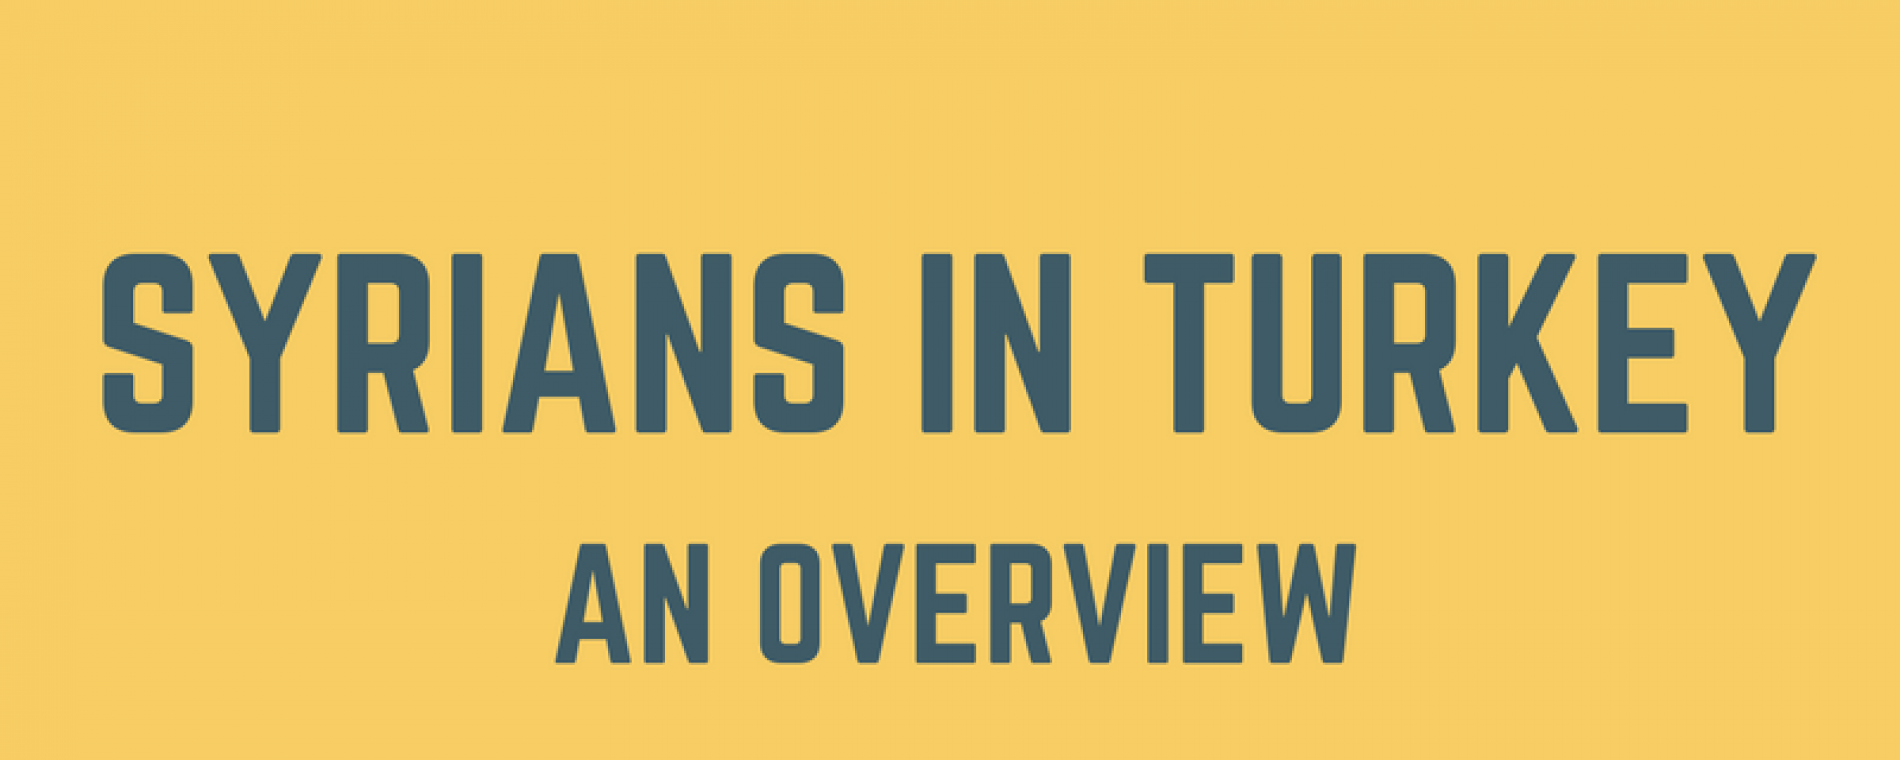 Syrians in Turkey – An Overview